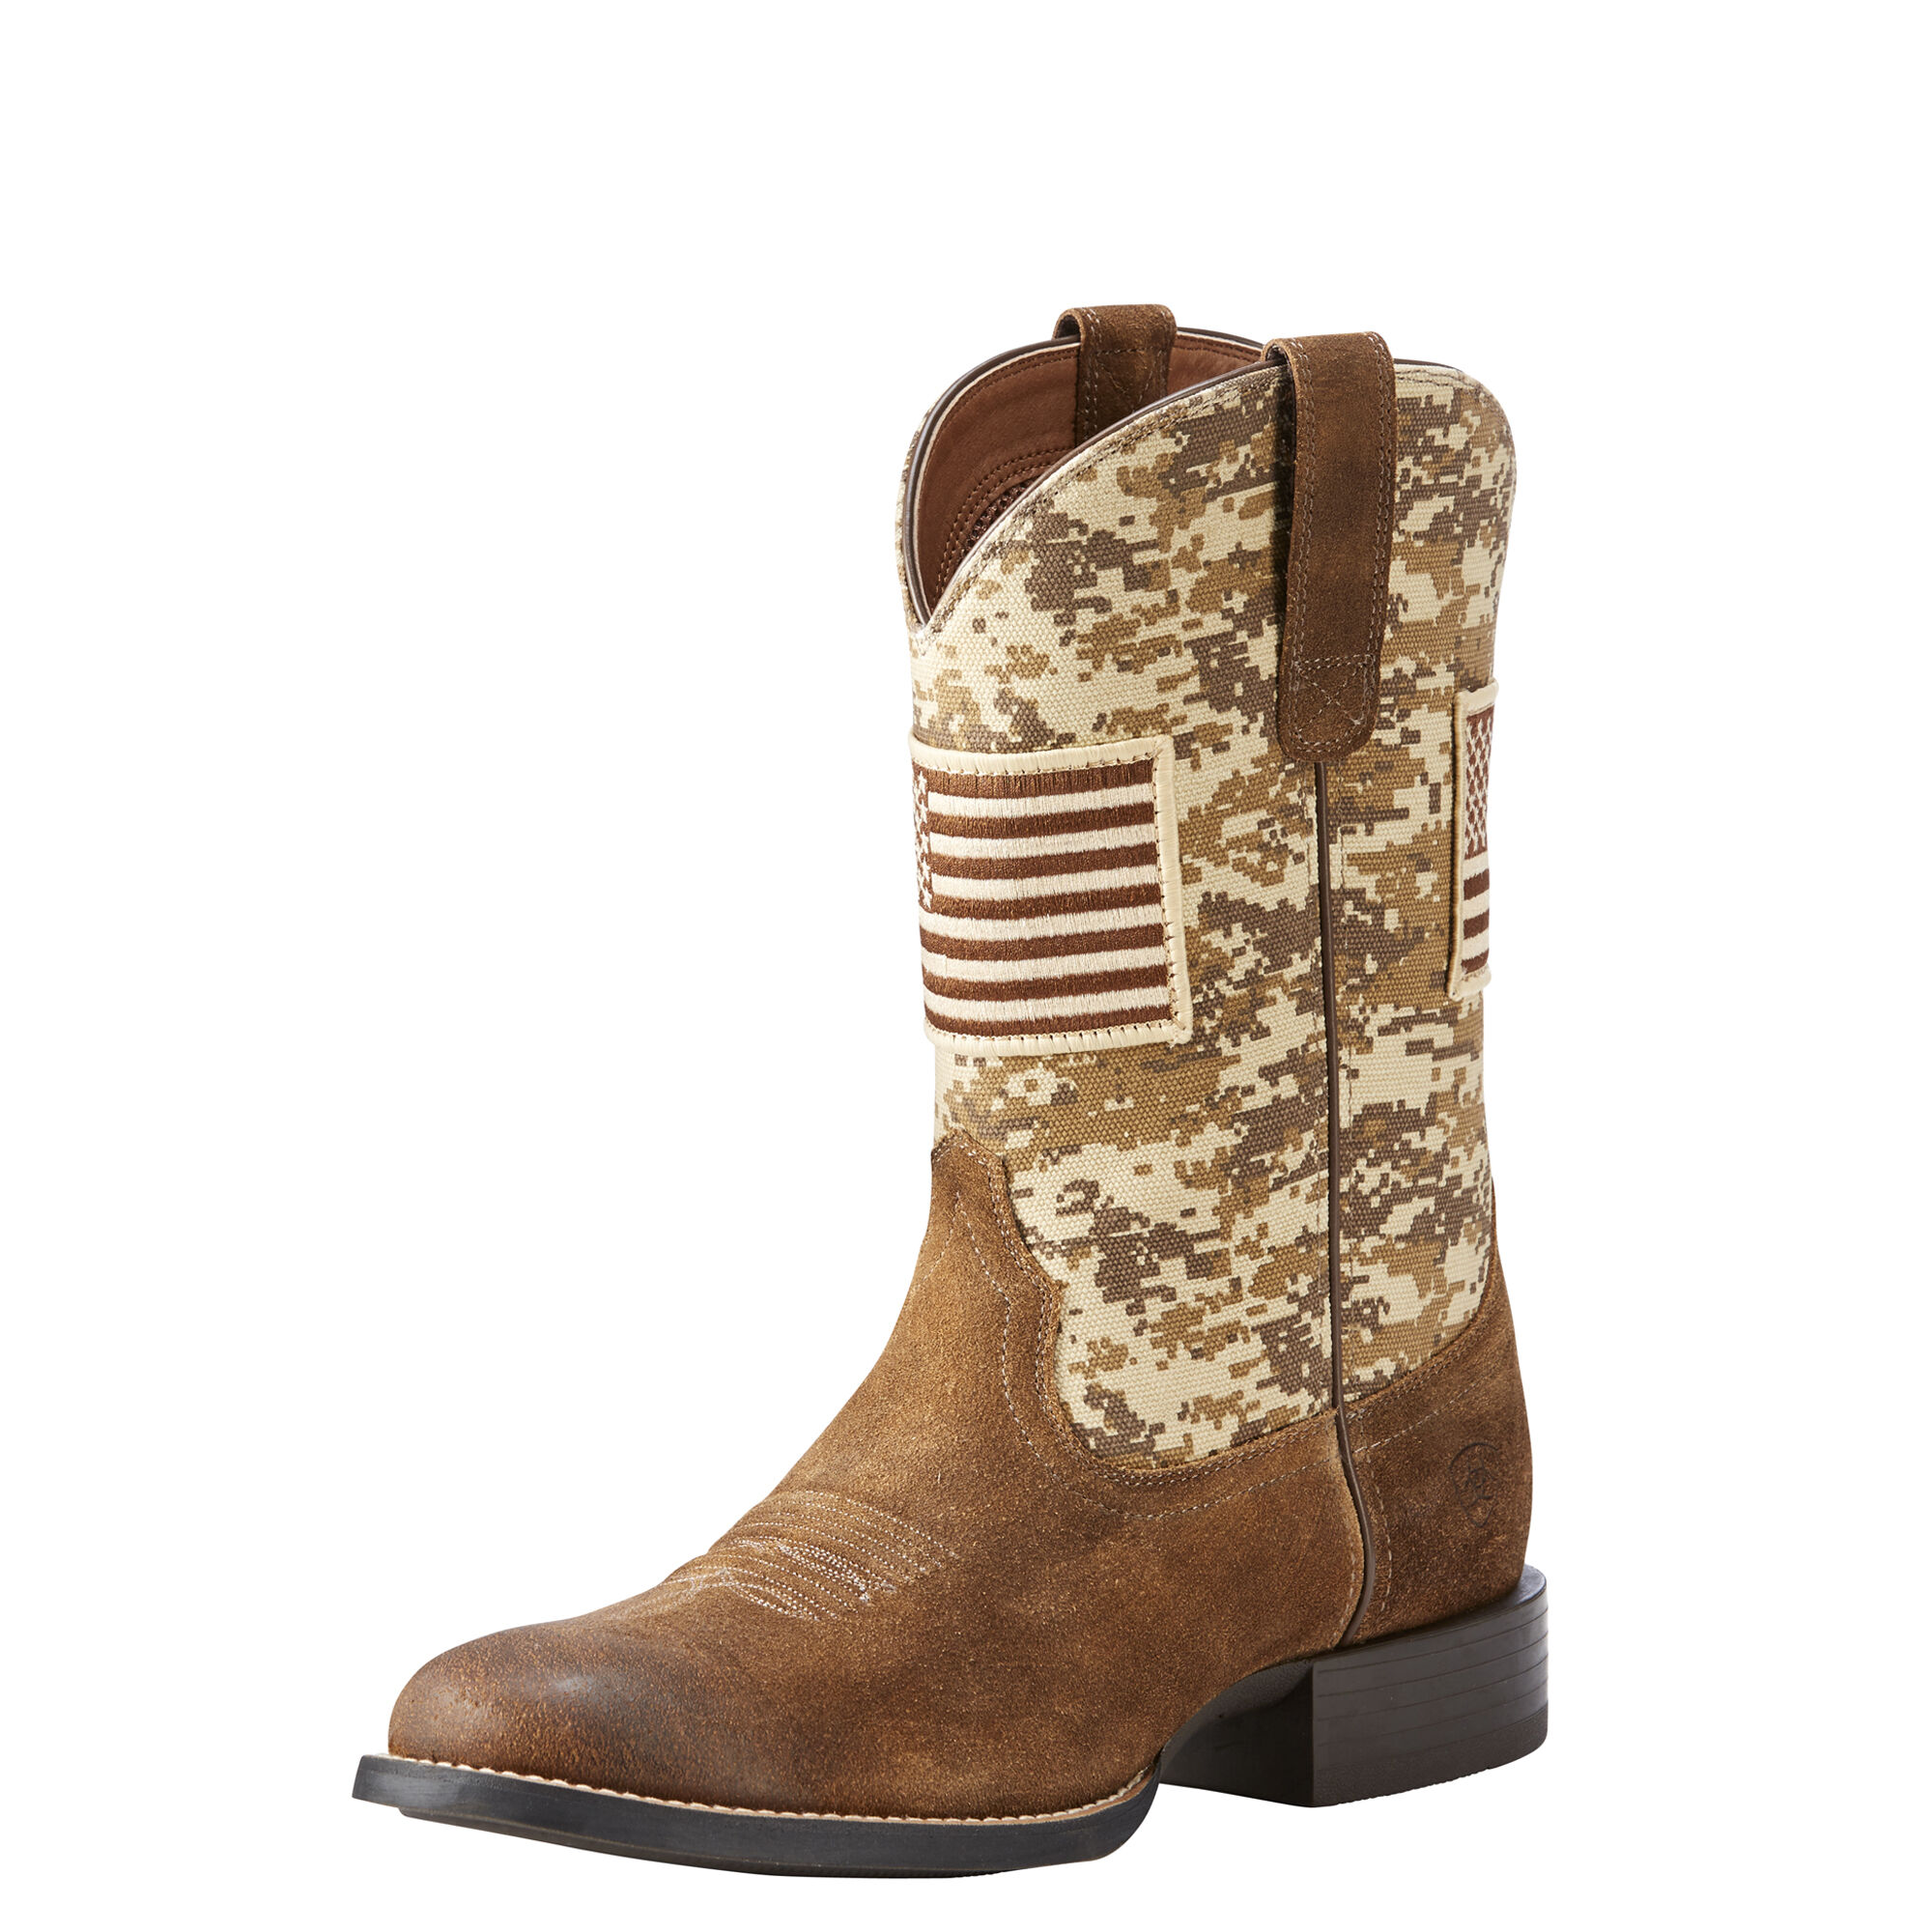 Ariat Round Toe Boots Top Sellers | bellvalefarms.com